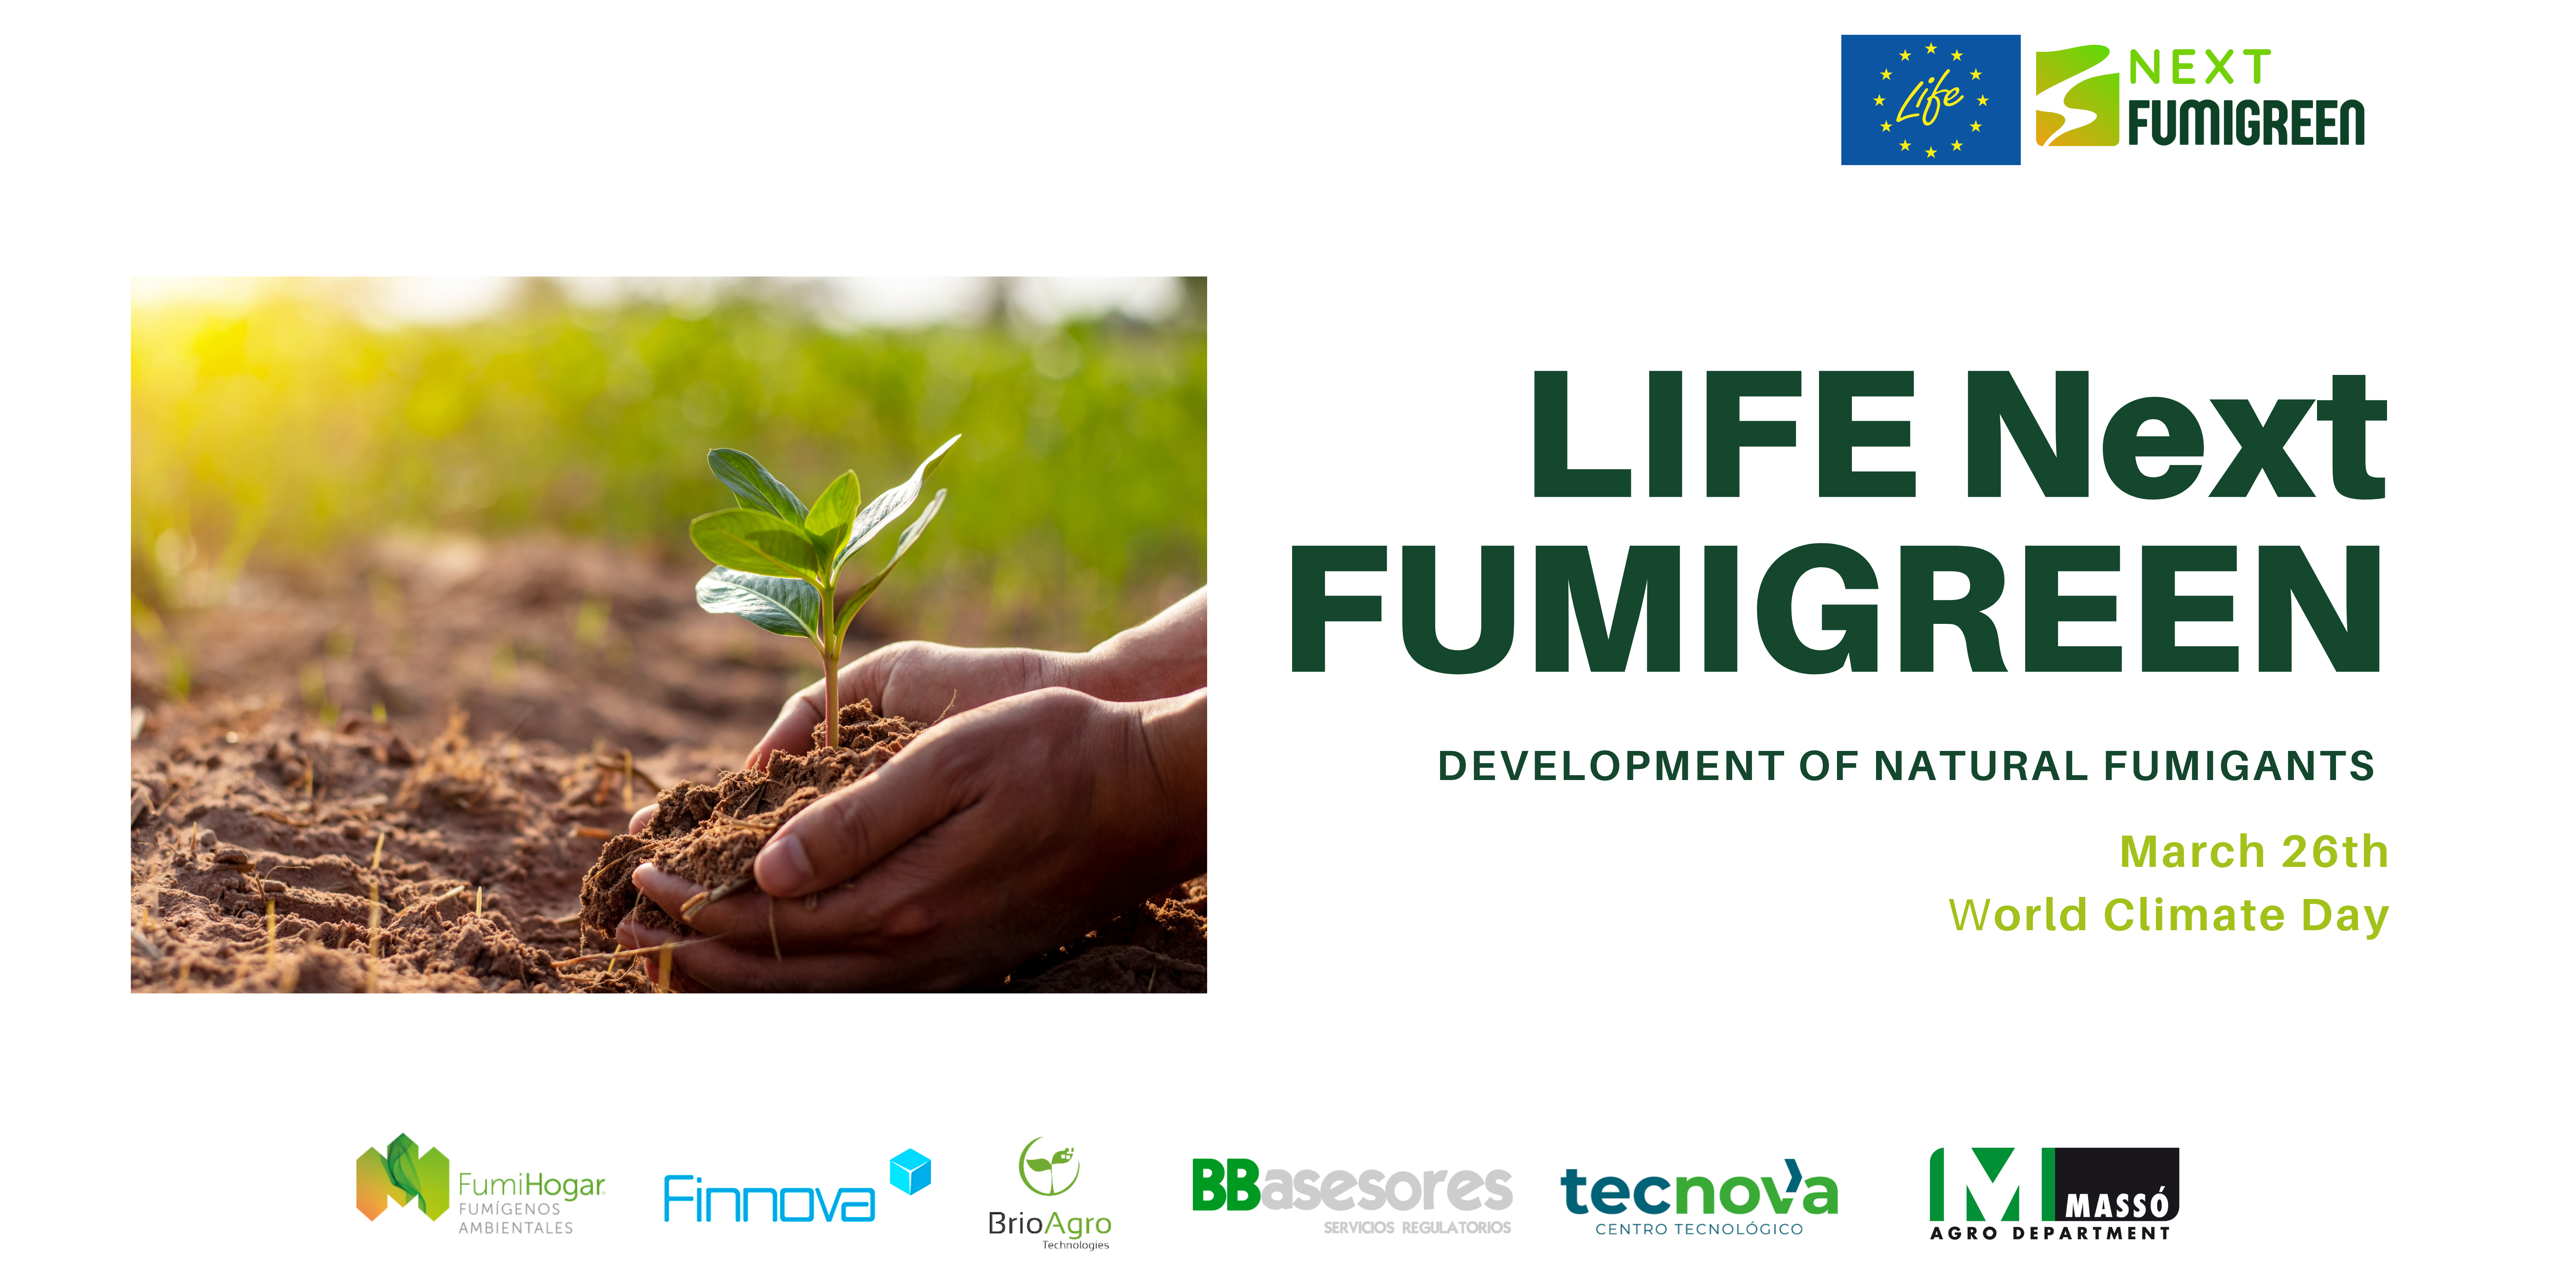 LIFE NextFUMIGREEN joins the celebration of International Climate Day